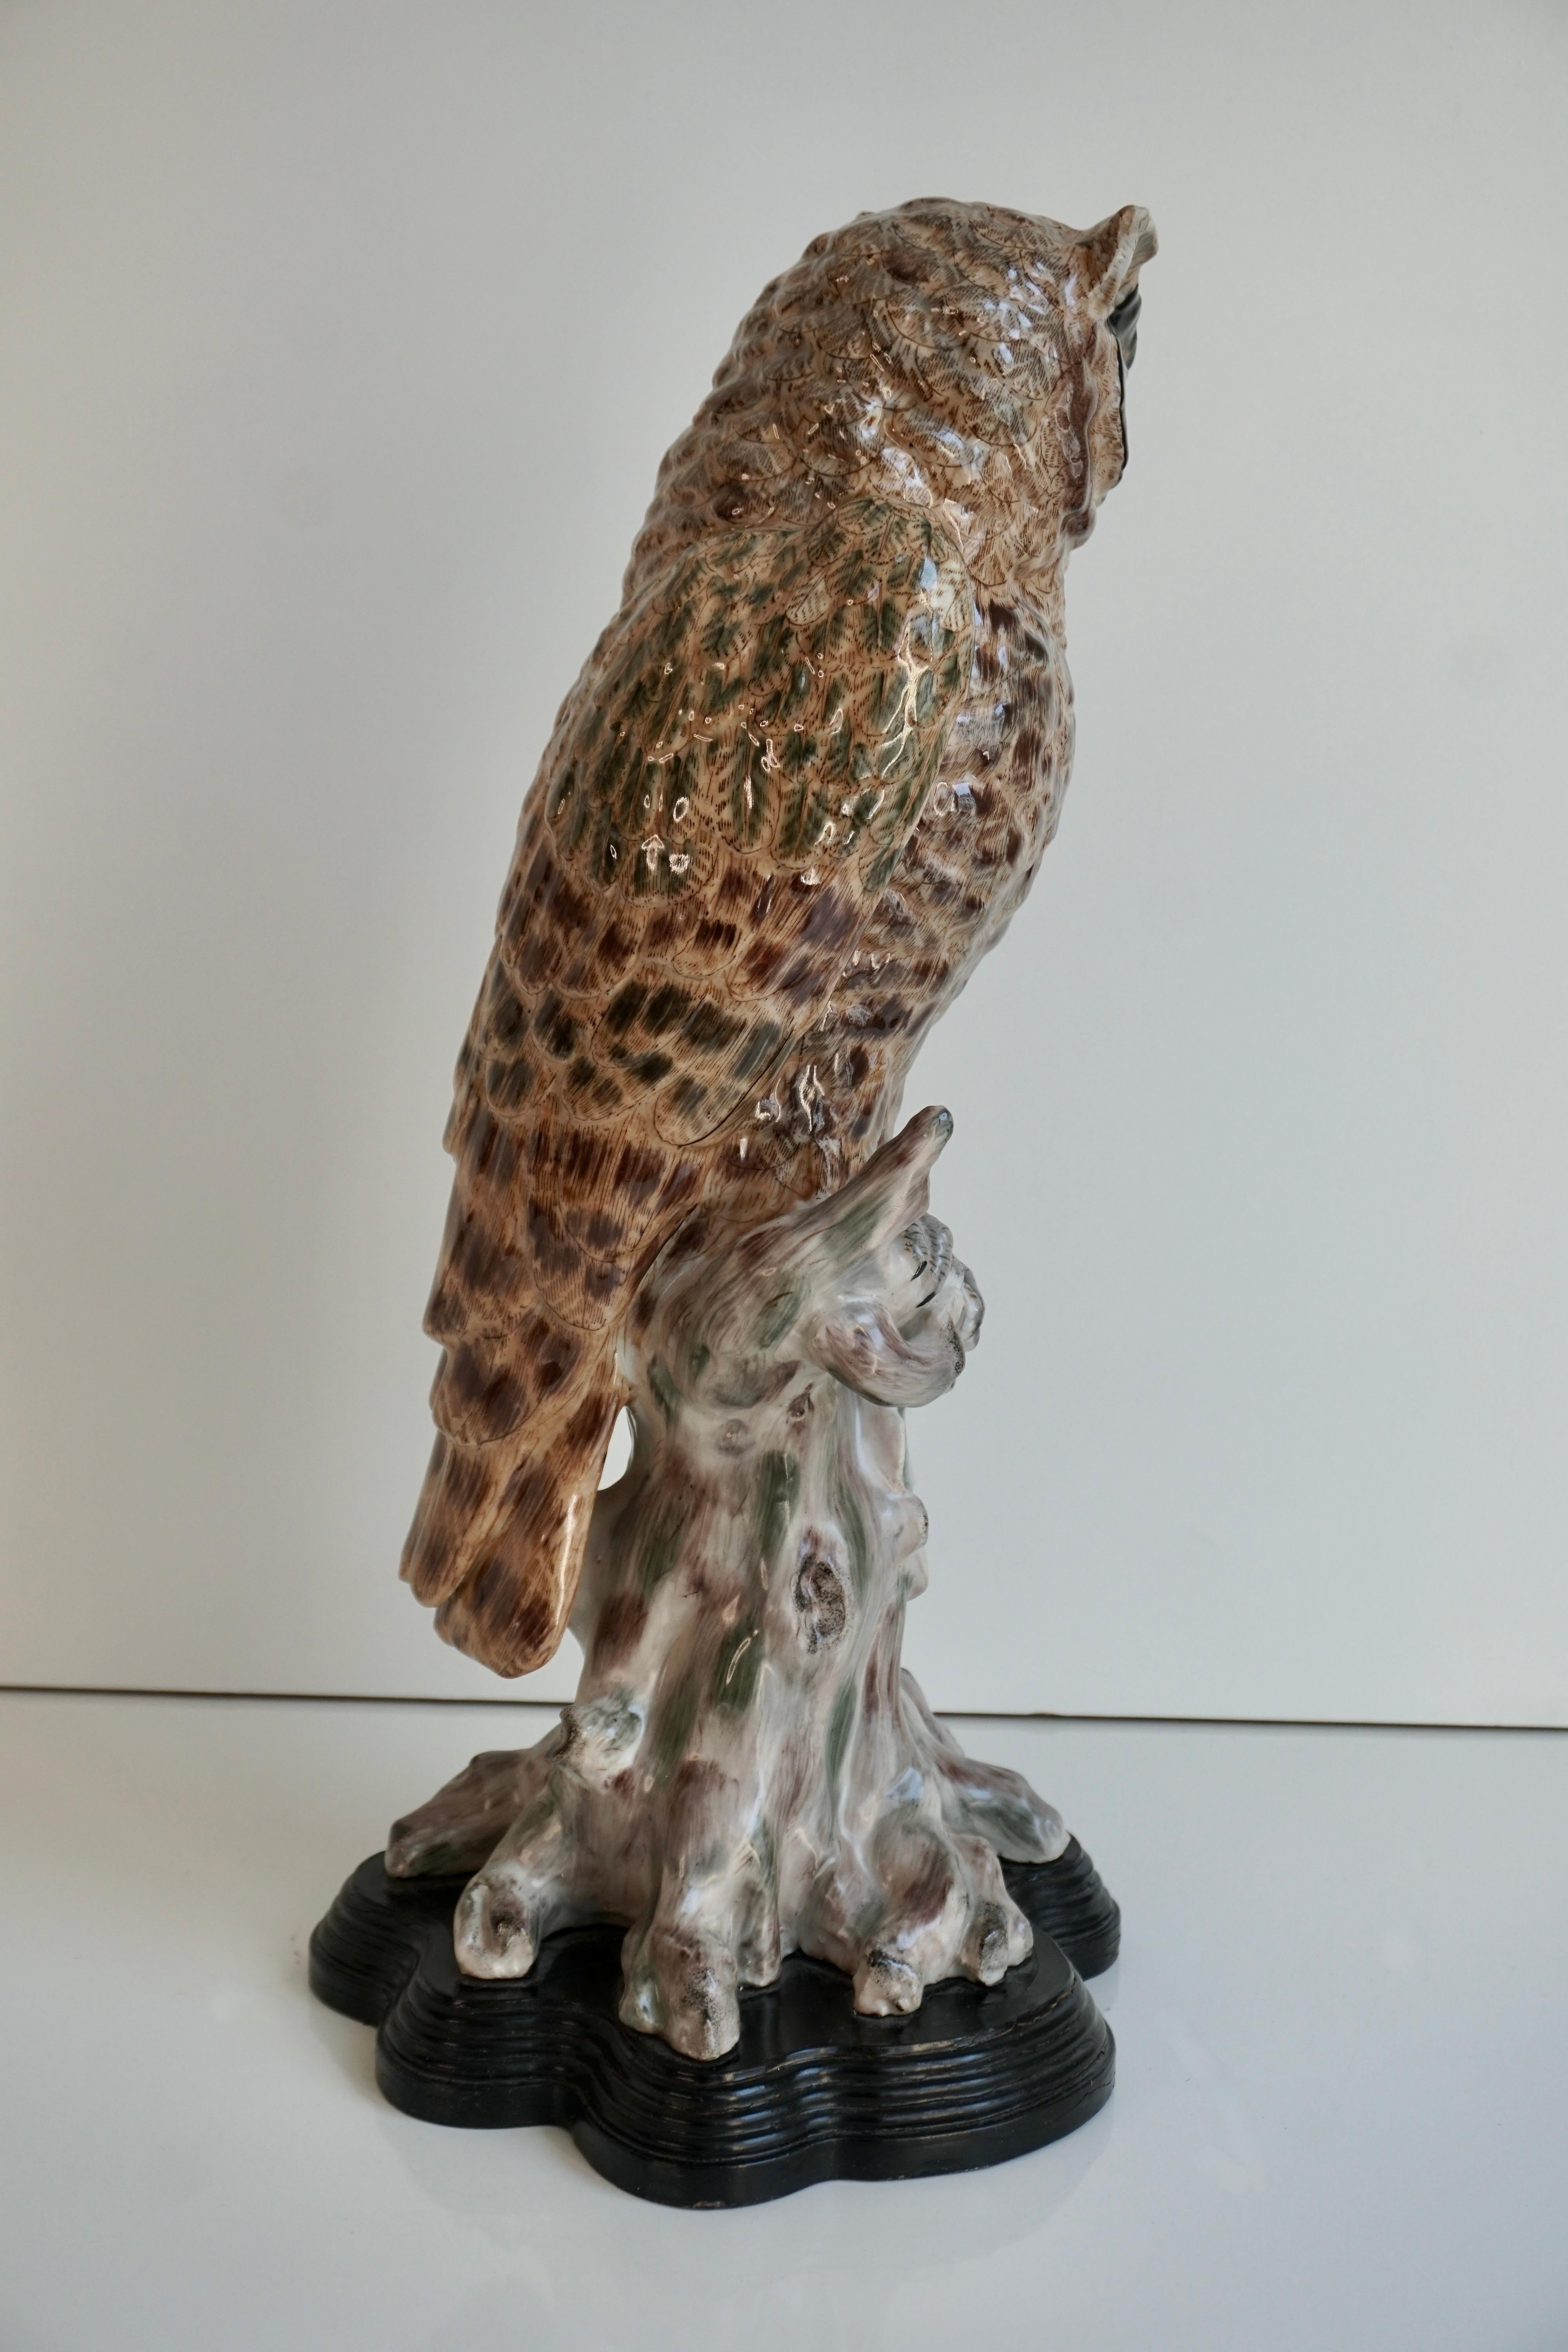 20th Century Rare and Mint Condition Brown Glazed Ceramic Barn Owl Sculpture For Sale 1